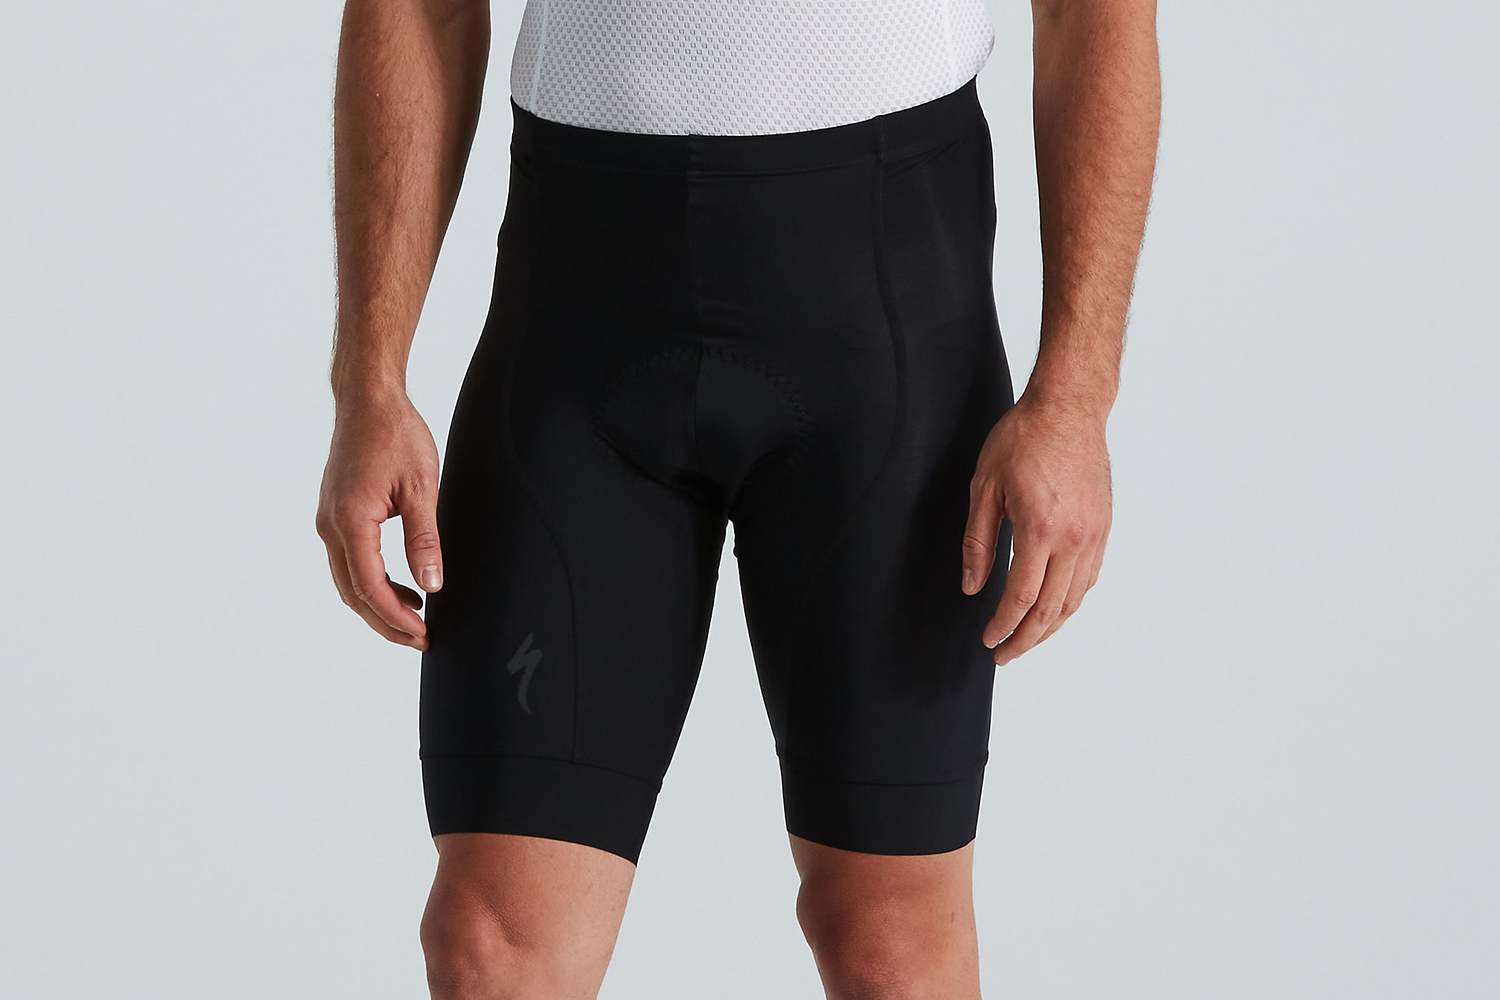 Back in the saddle: Get ready to ride with the best cycling shorts for ...